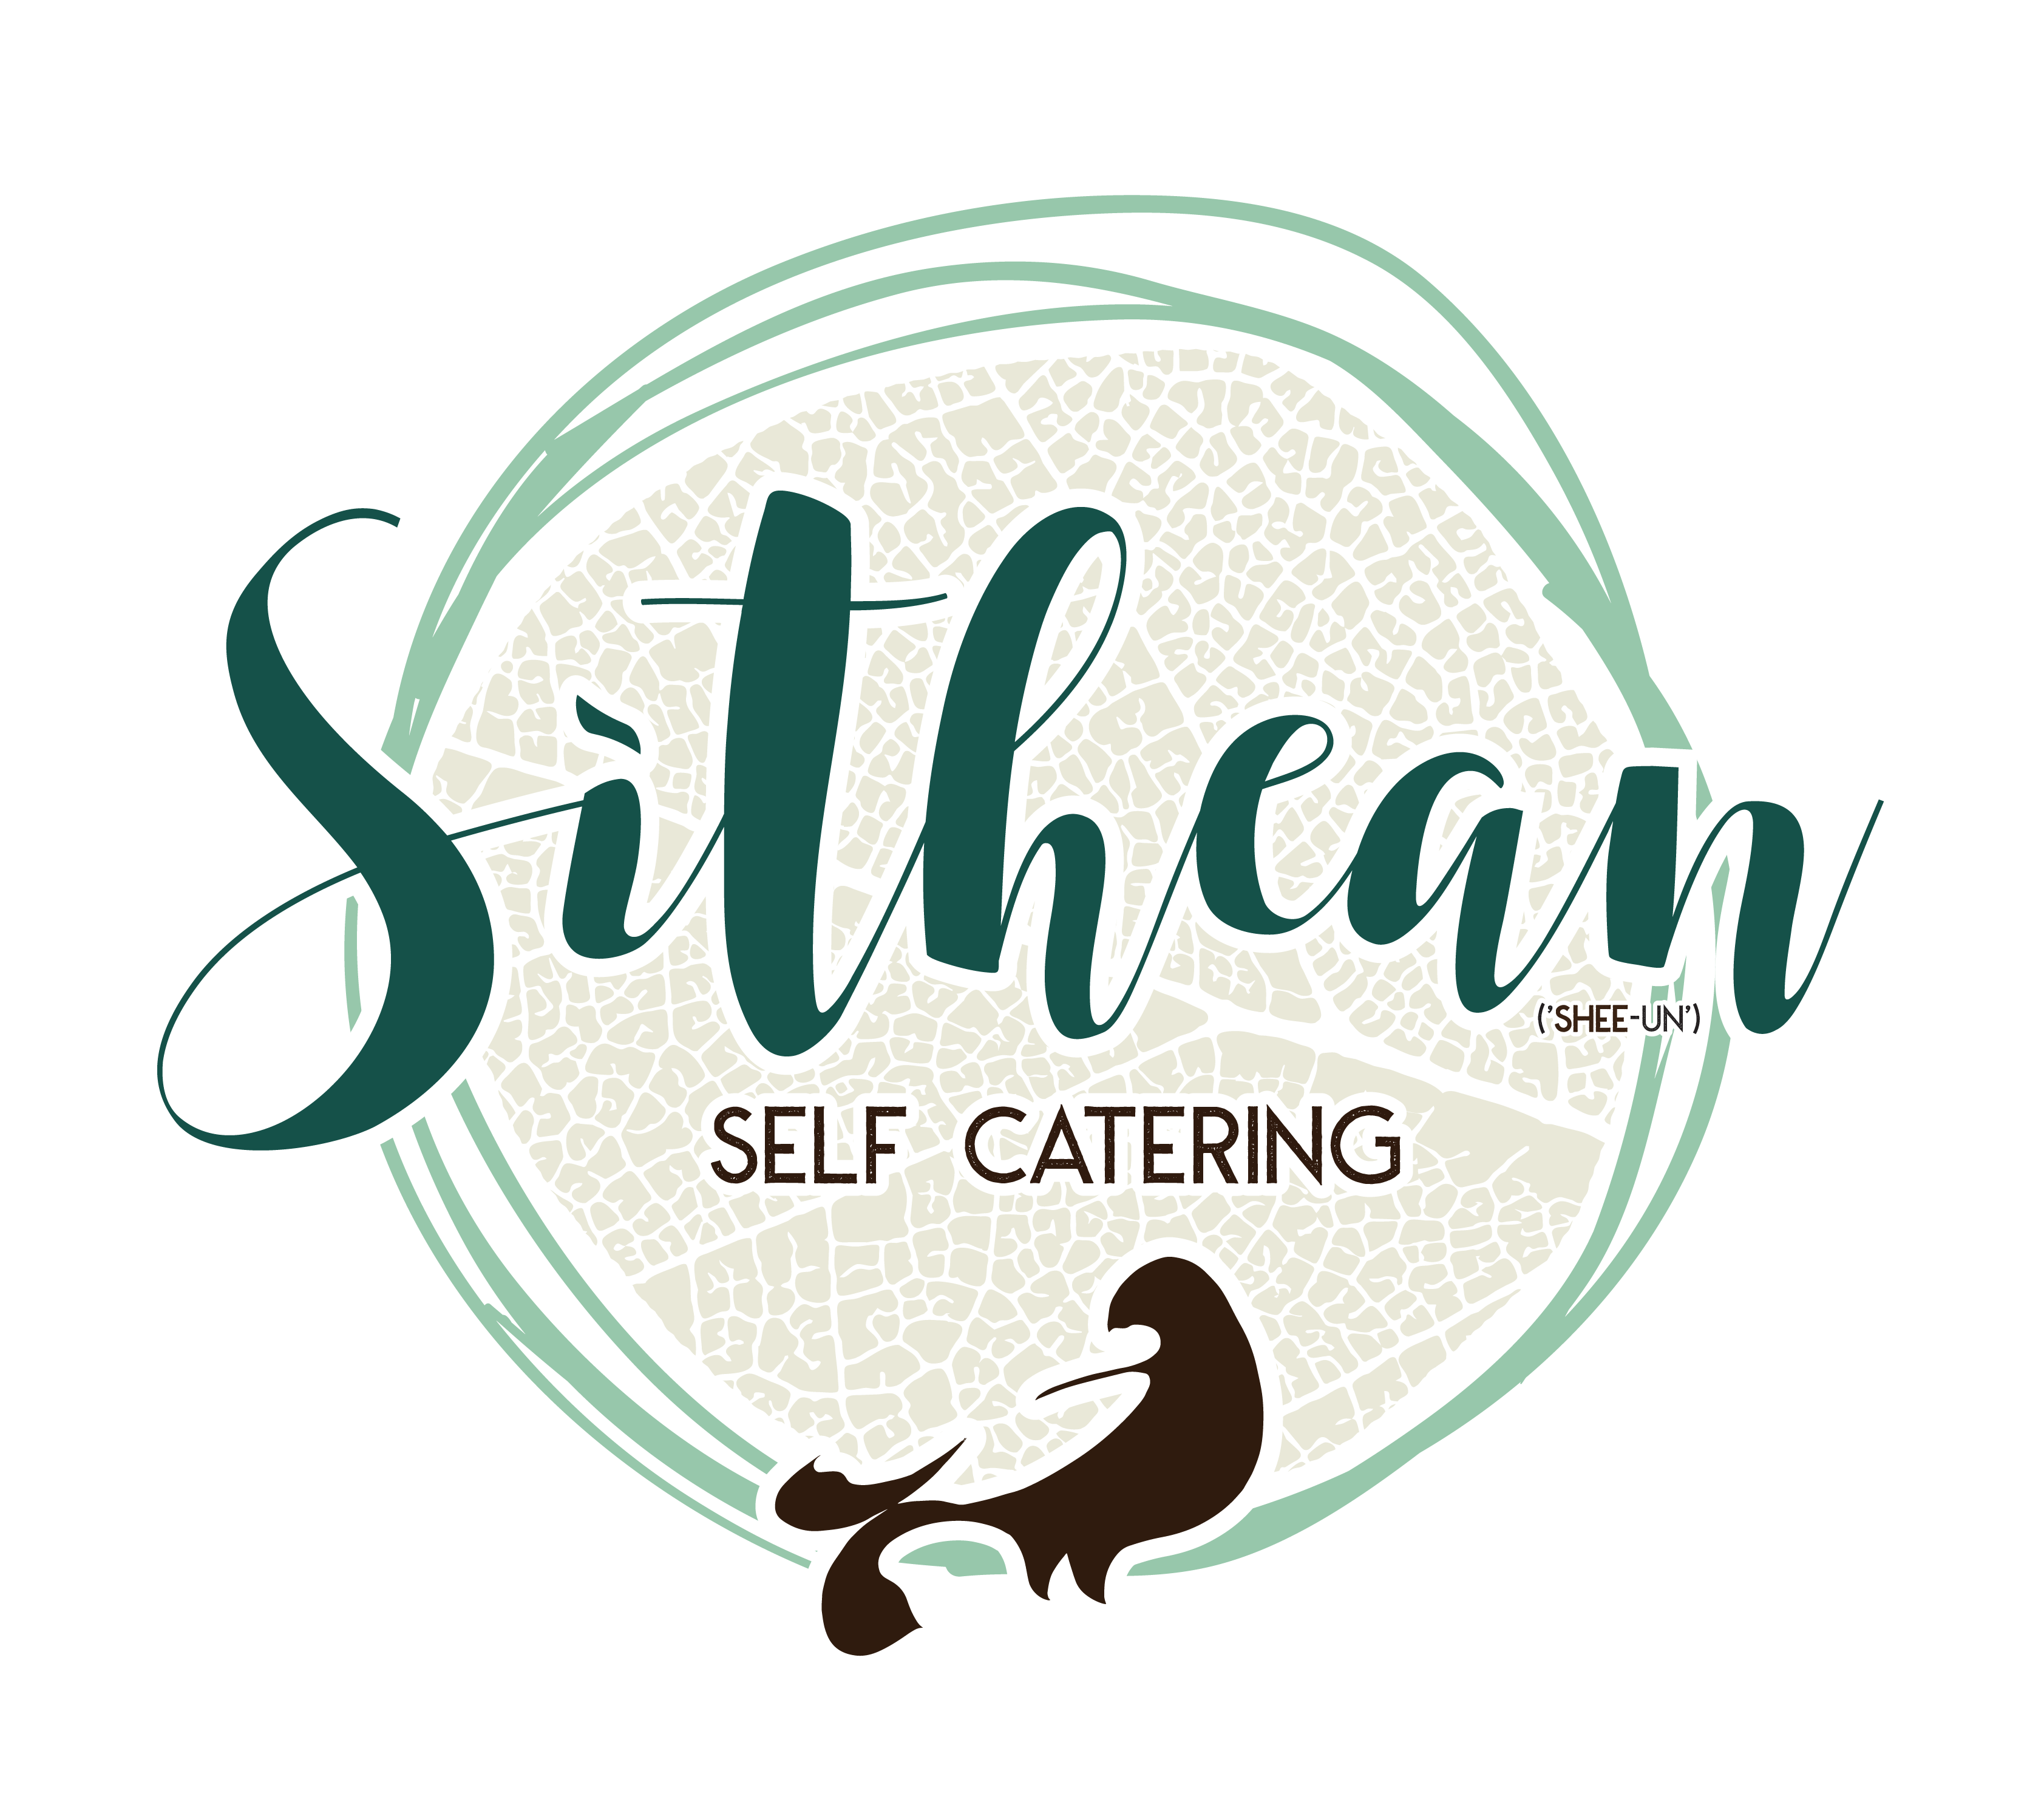 Sithean Self Catering